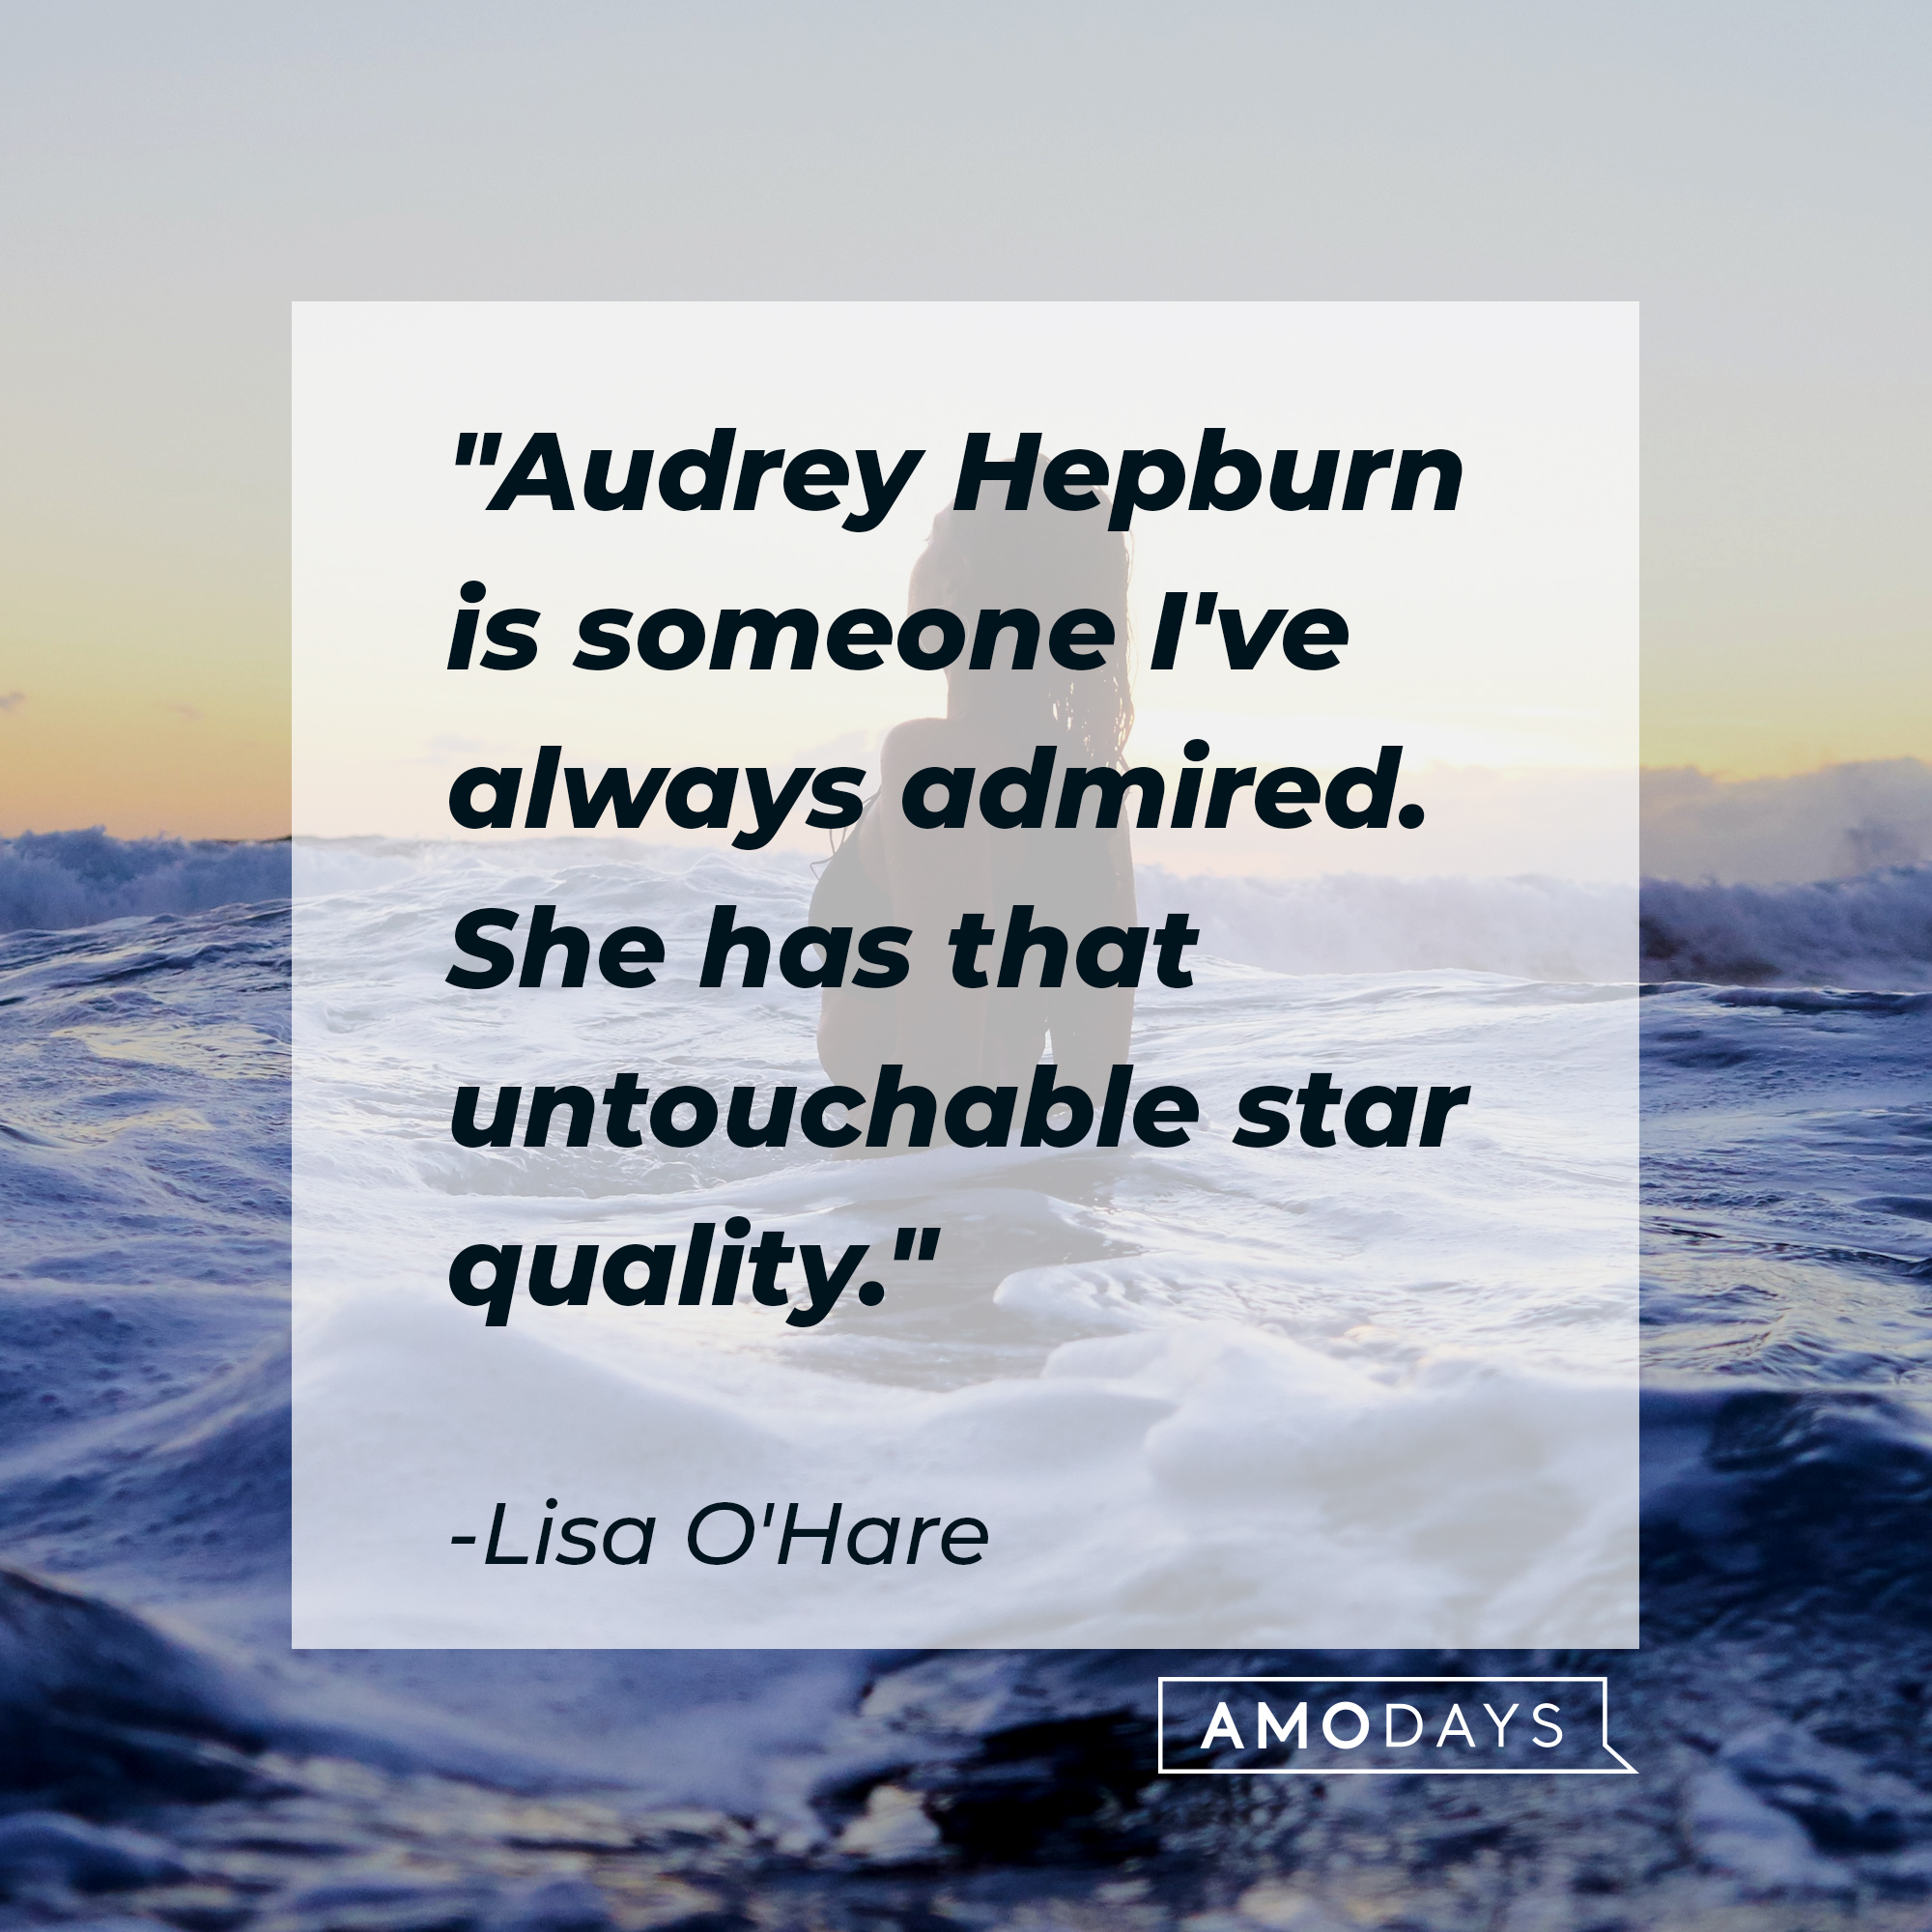 Lisa O'Hare's quote: "Audrey Hepburn is someone I've always admired. She has that untouchable star quality." | Source: Unsplash